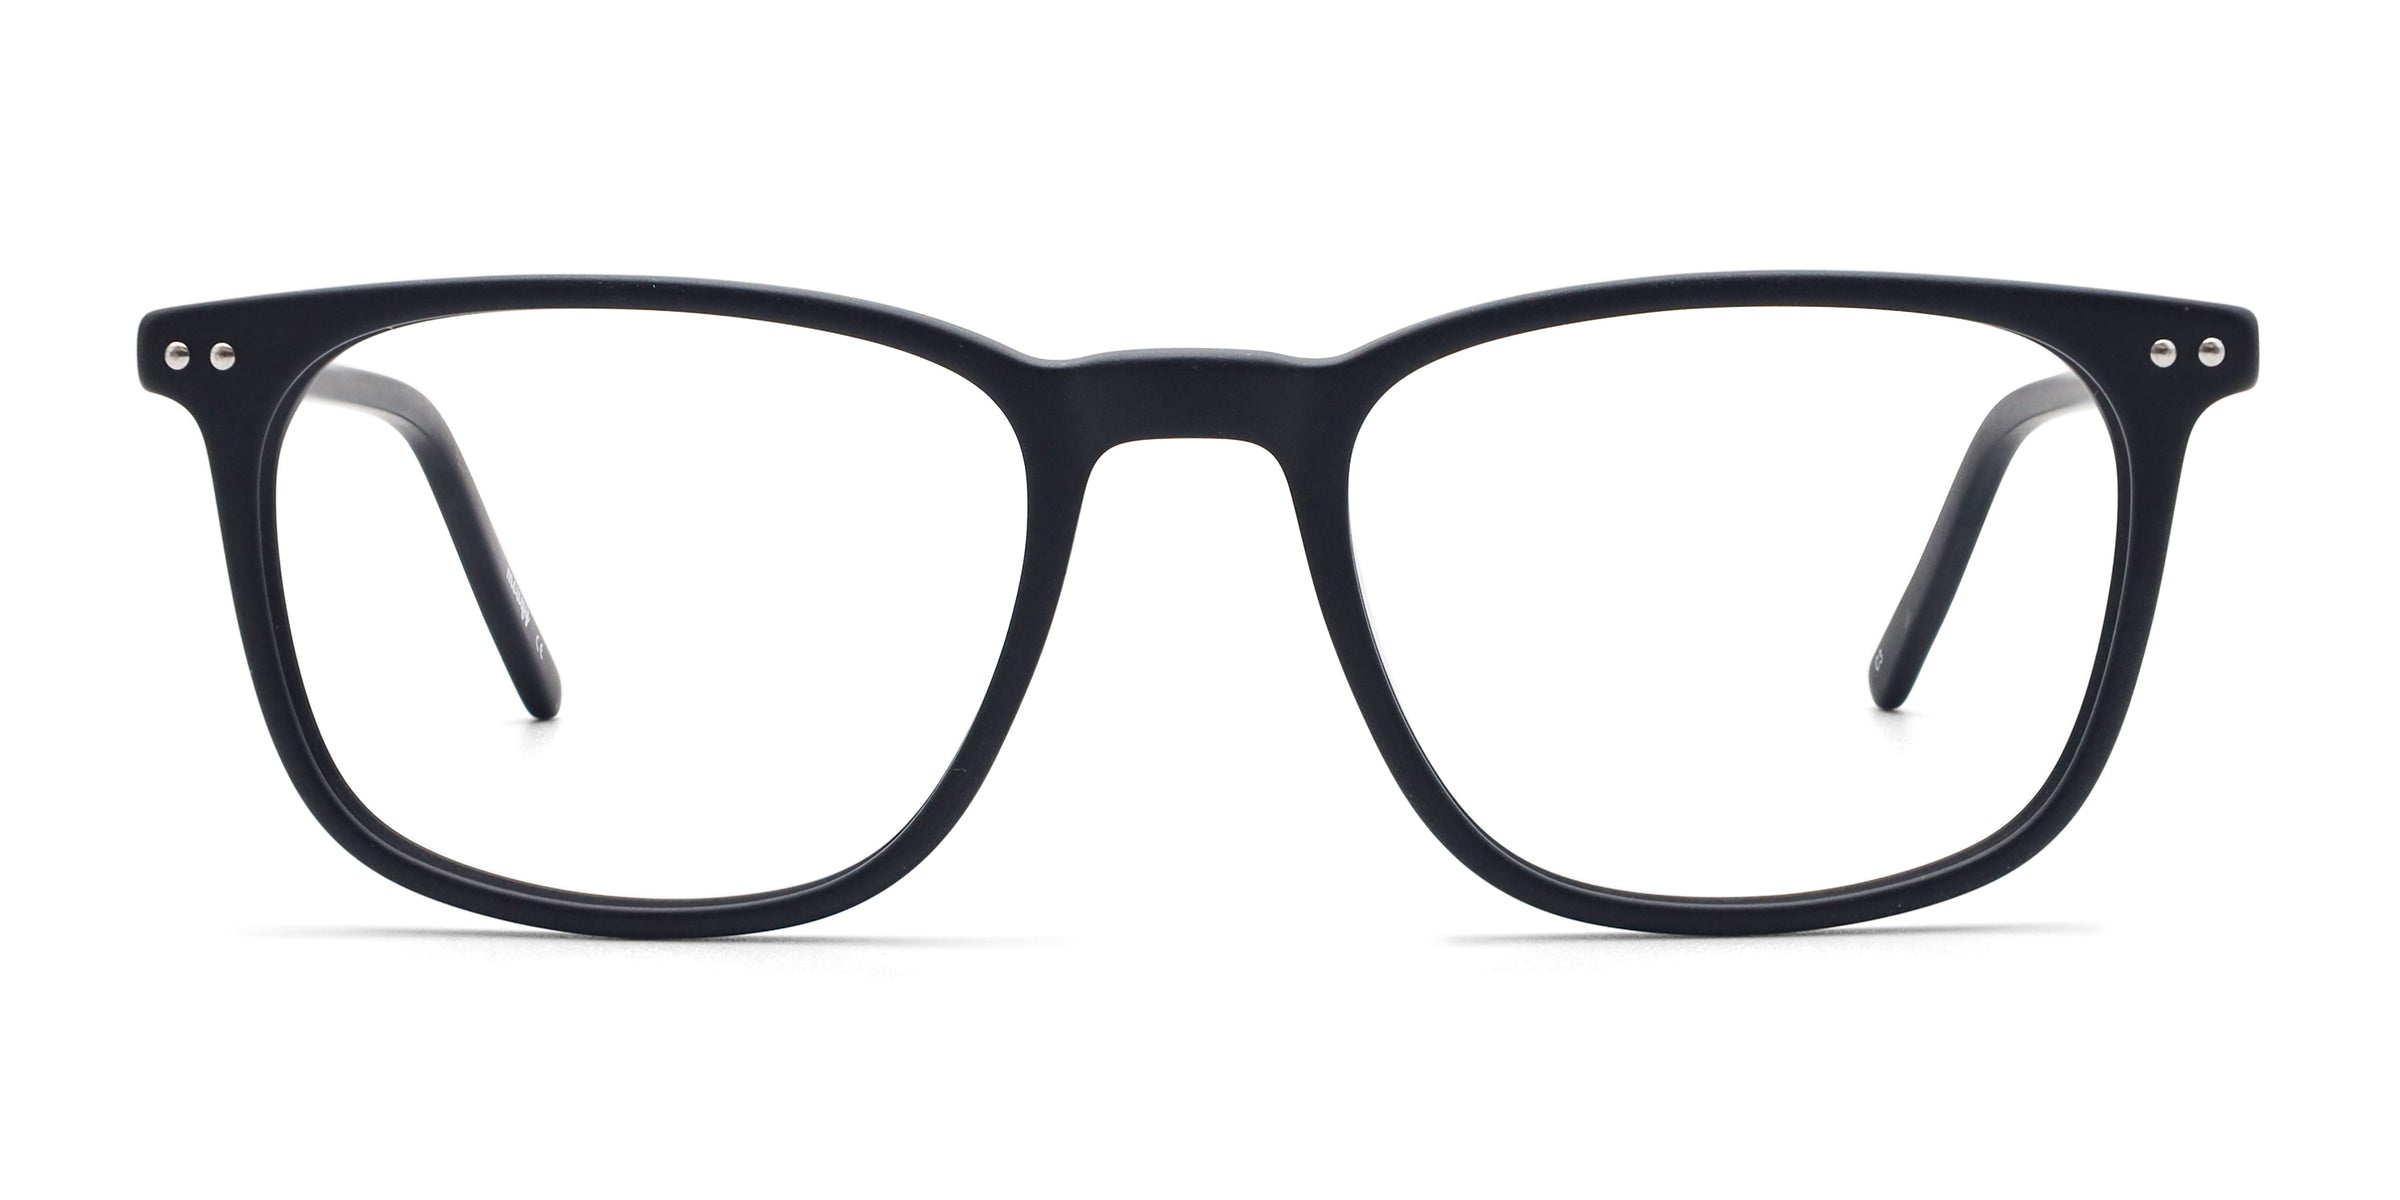 Queen Square Black eyeglasses frames front view